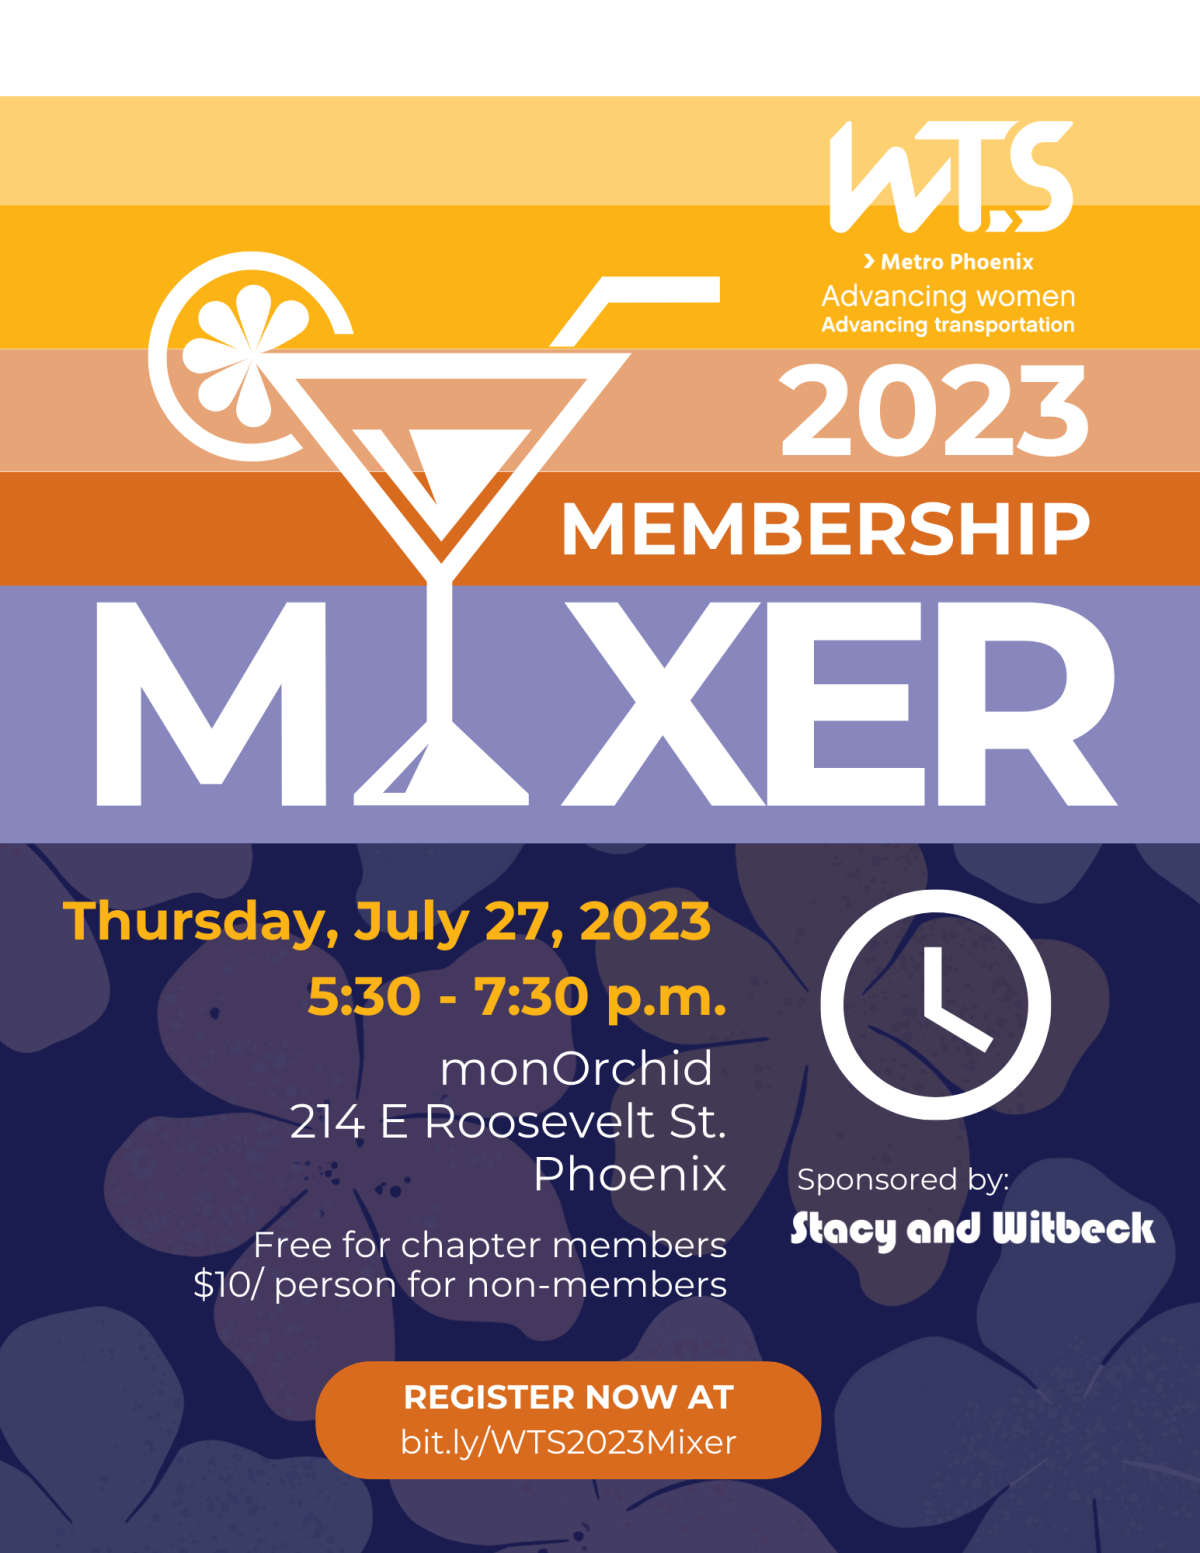 2023 WTS Membership Mixer on July 27 from 5:30 to 7:30 p.m. at monorchid in Phoenix